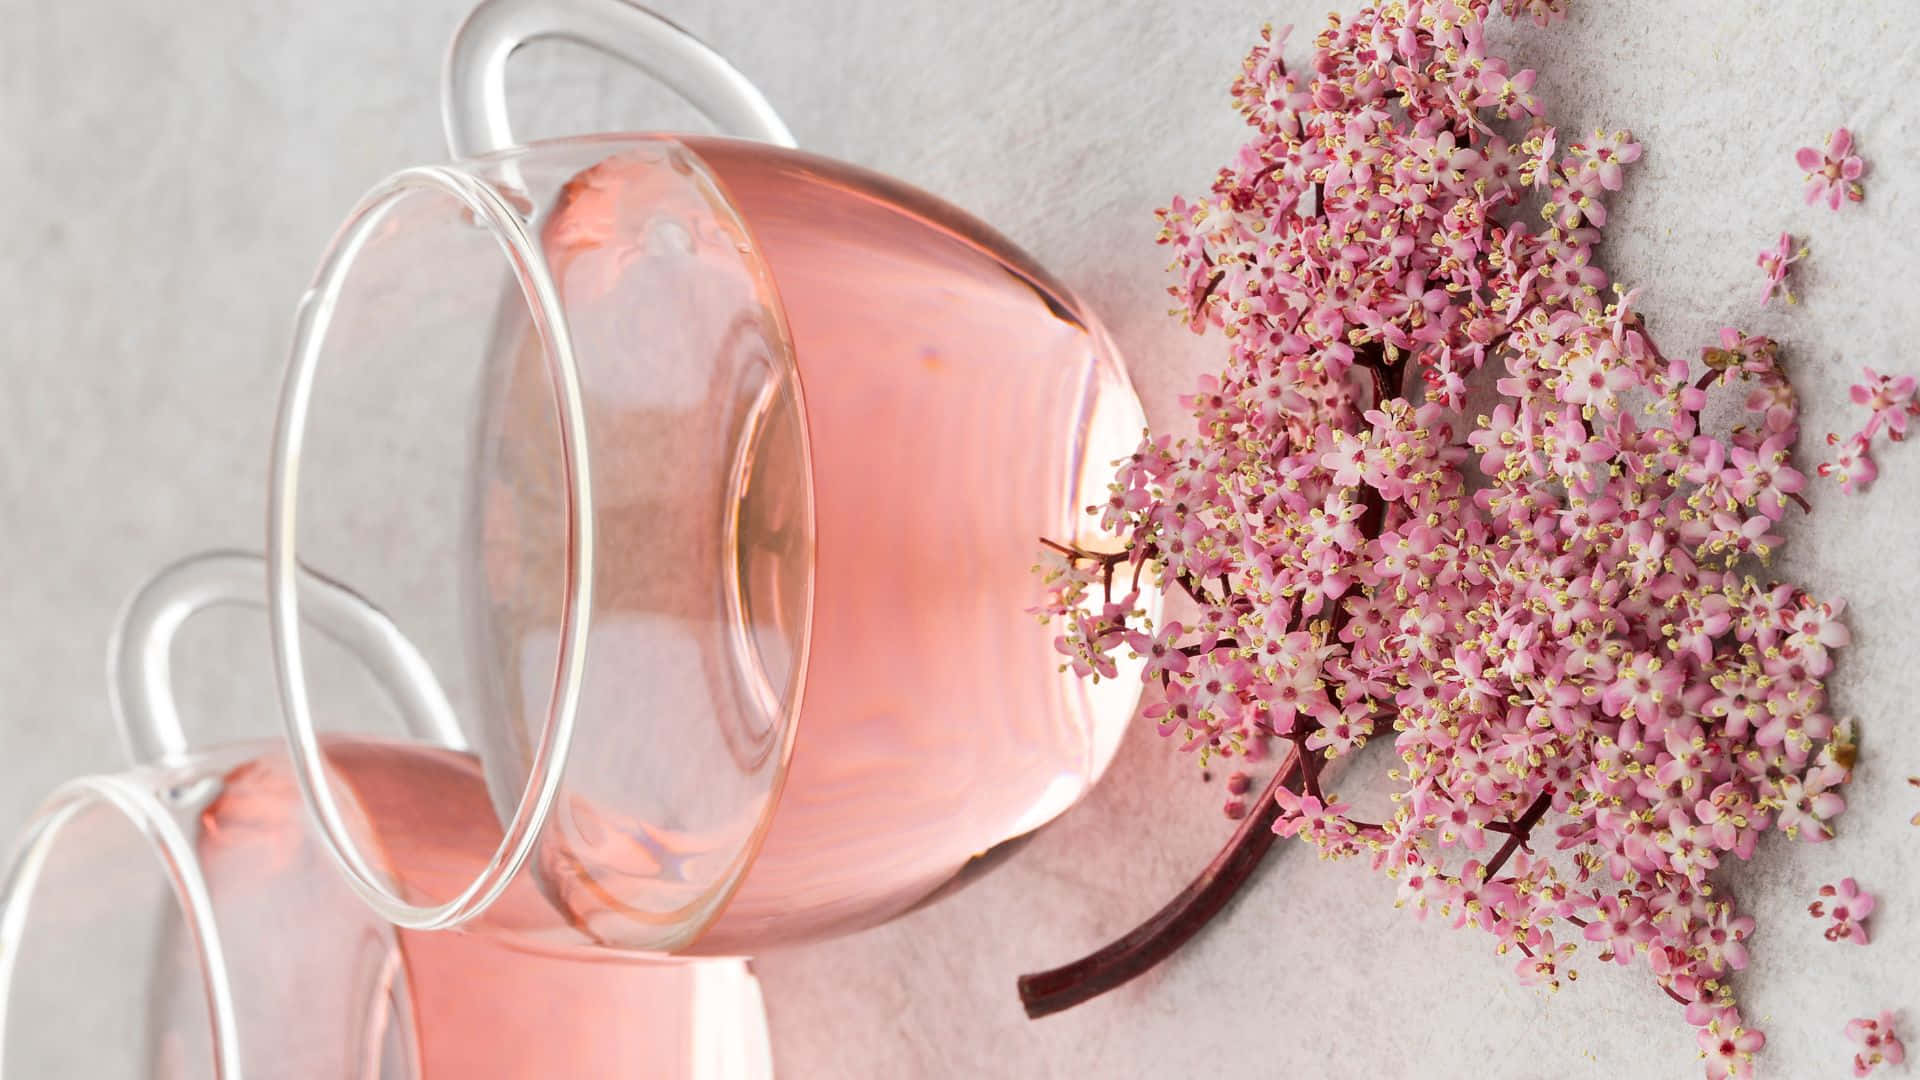 Caption: Soothing Pink Tea In A Transparent Teacup Wallpaper